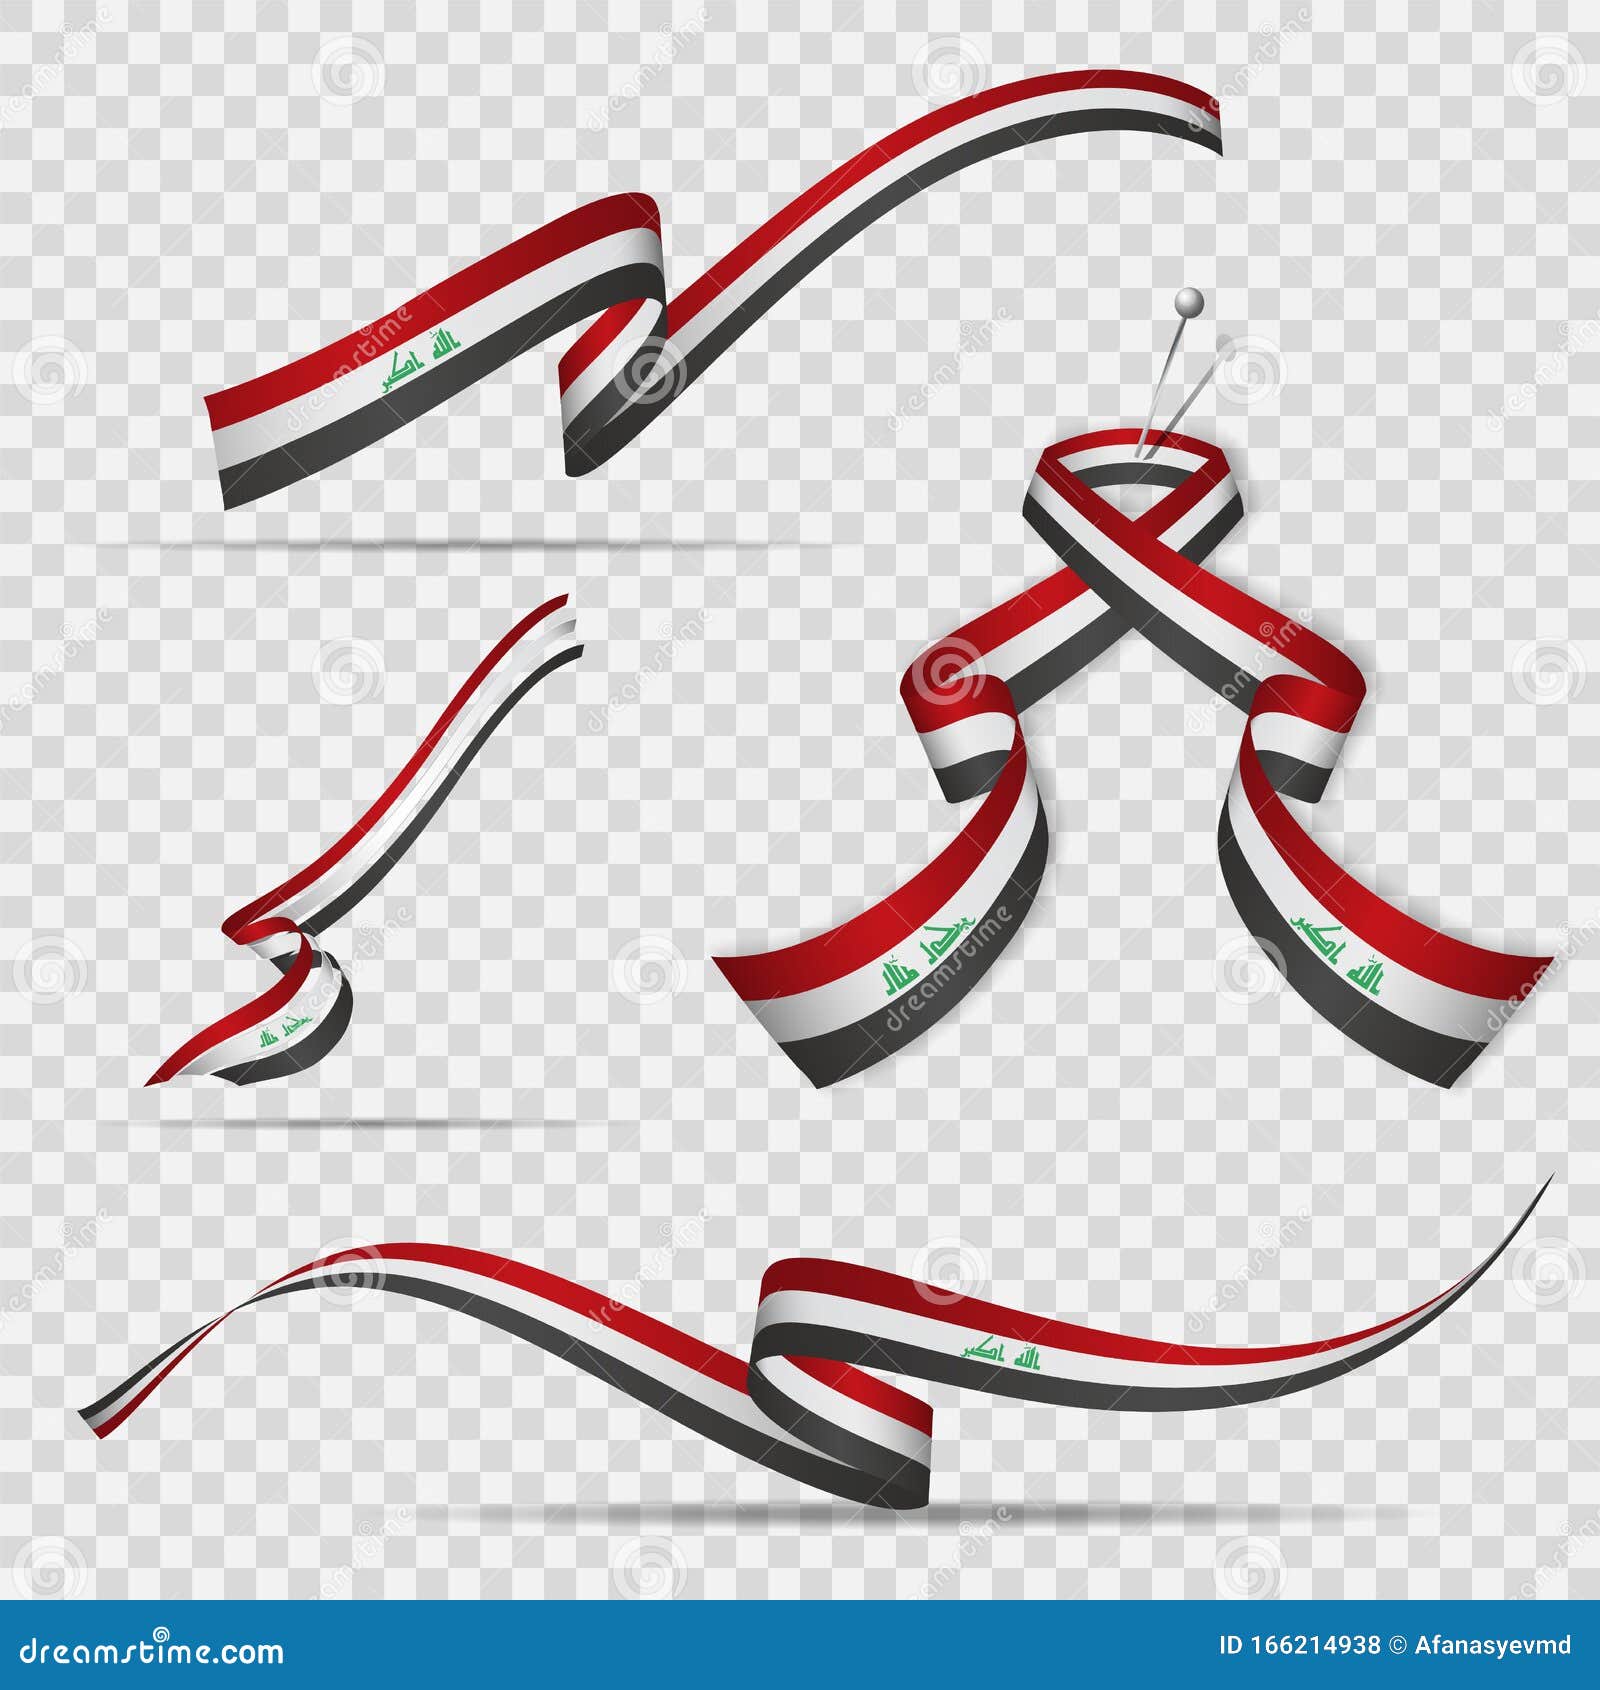 flag of iraq. 3rd of october. set of realistic wavy ribbons in colors of iraqi flag on transparent background. allahu